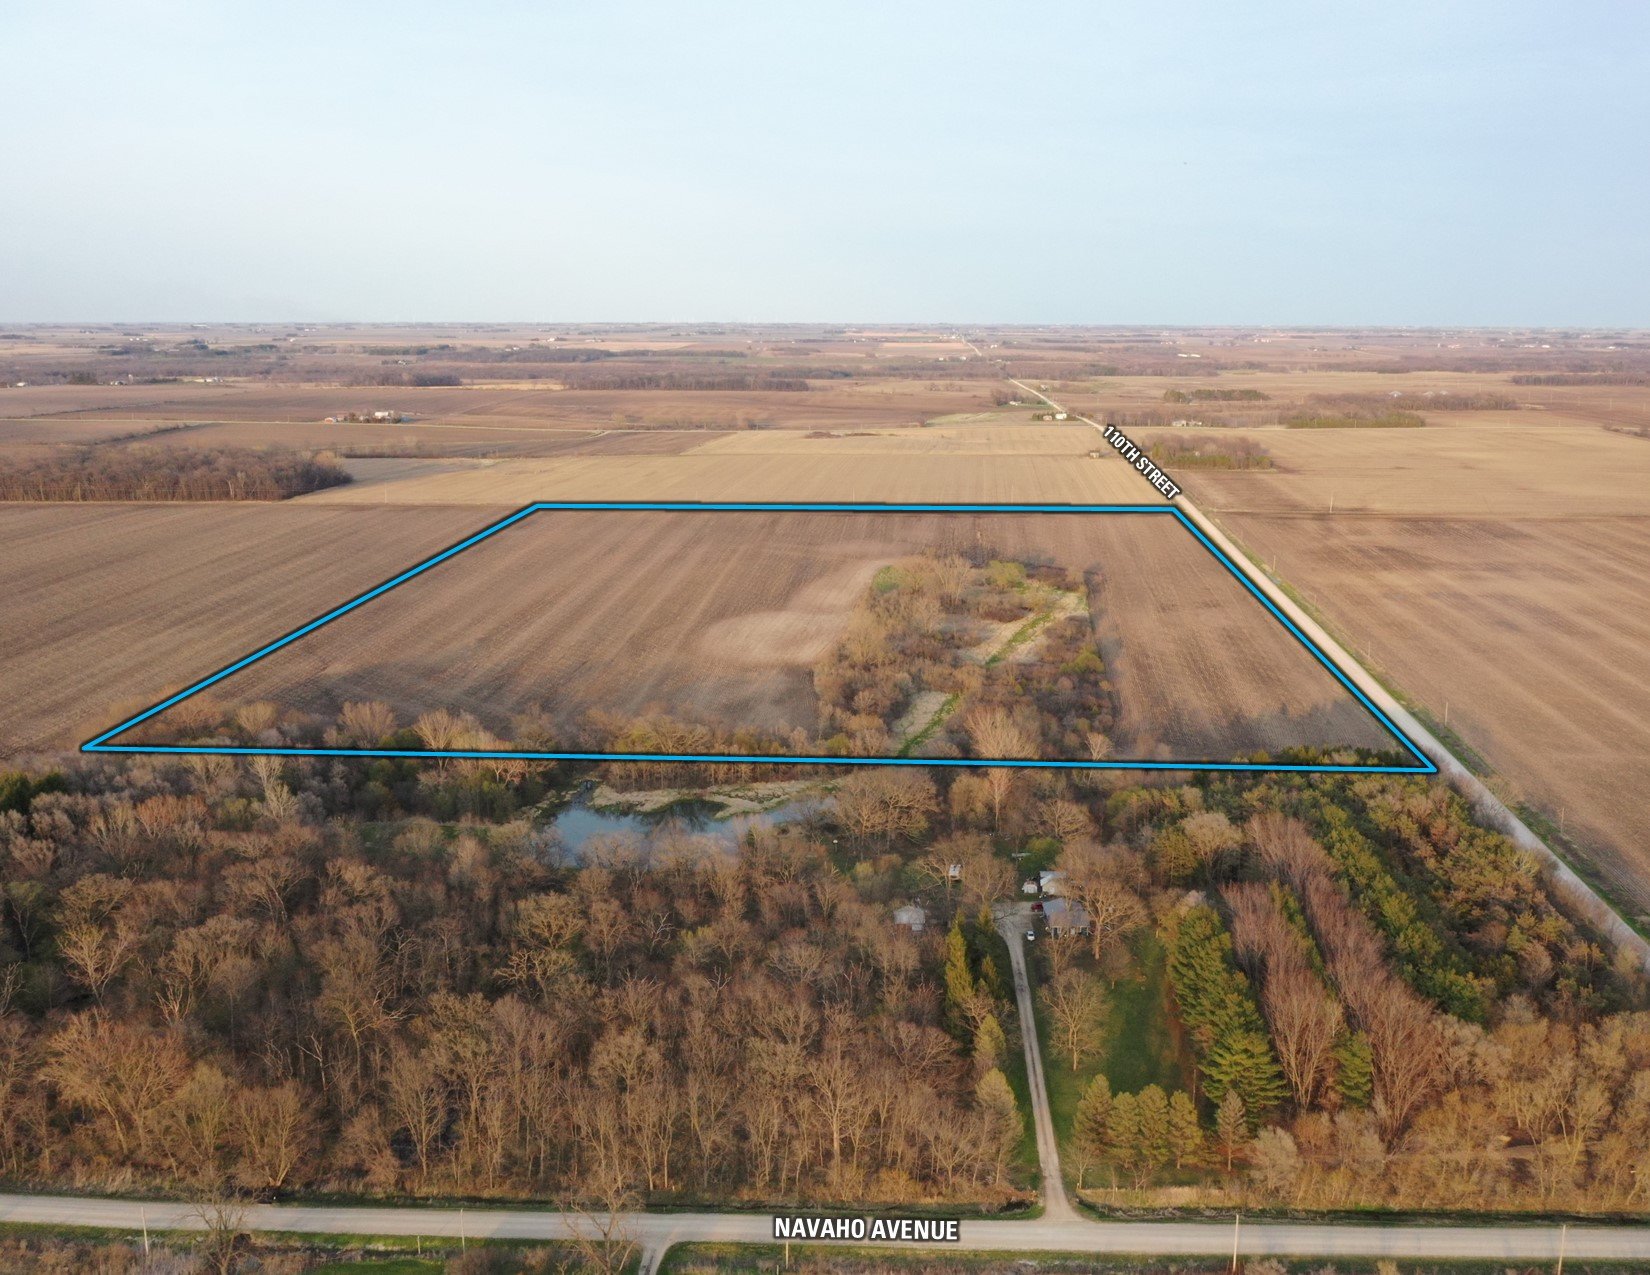 2-110th-street-frederika-50631-Manuel, Beverly - Bremer Co -Tract 2 Aerial-2.jpg